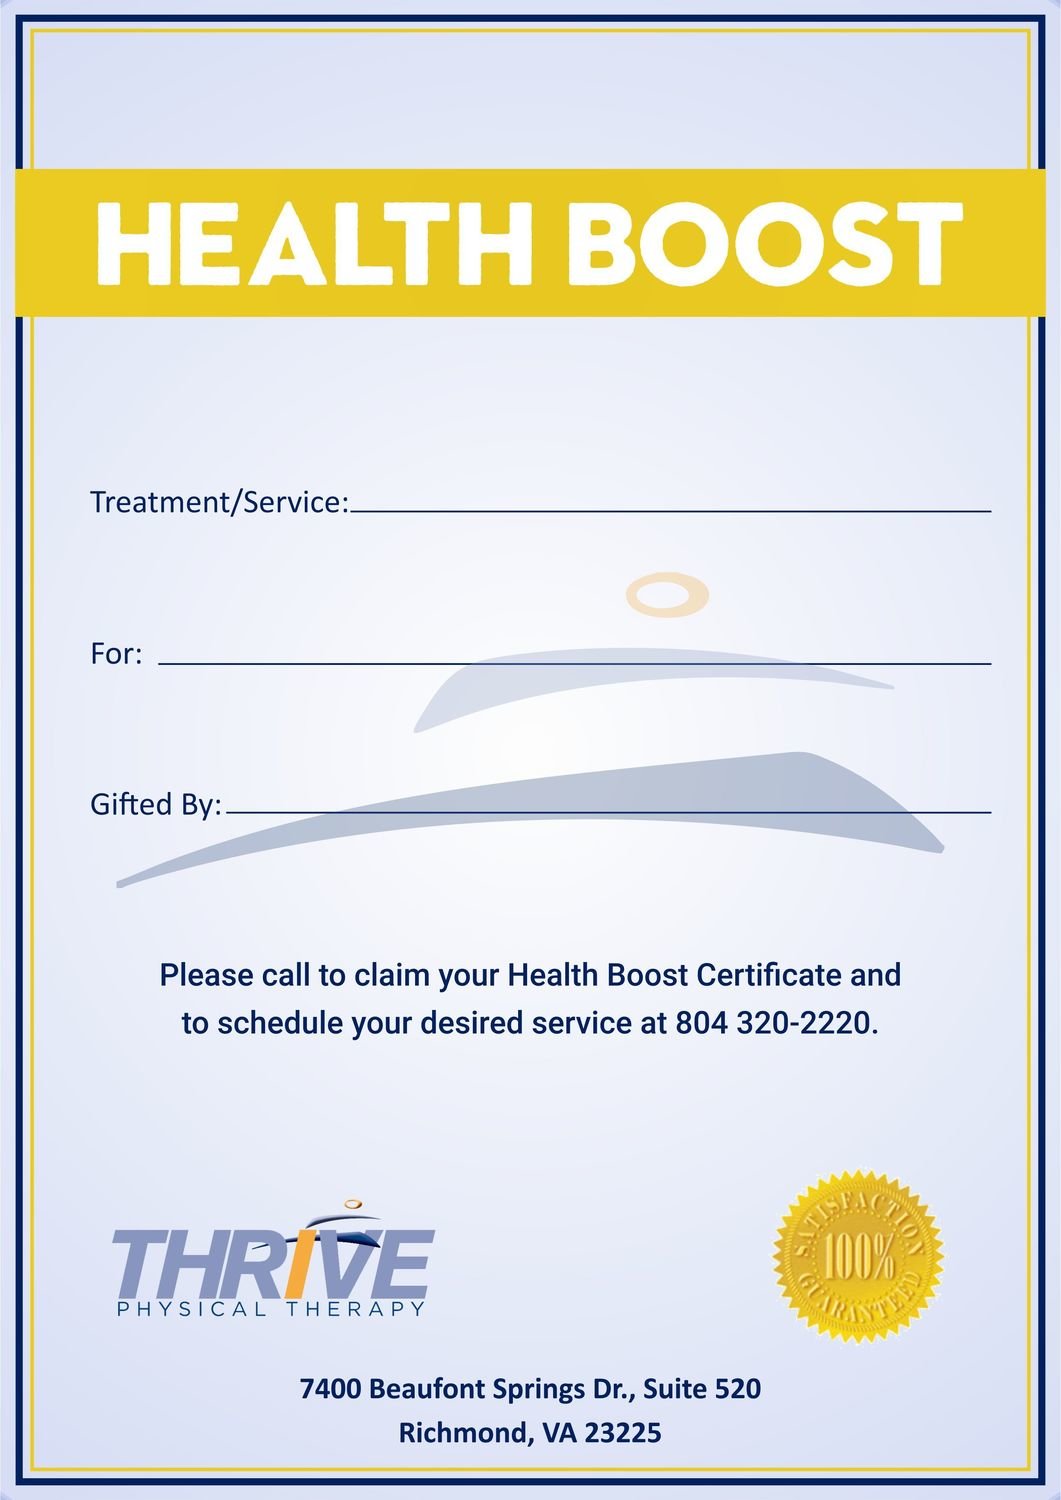 Health Boost Gift Certificate-Gold